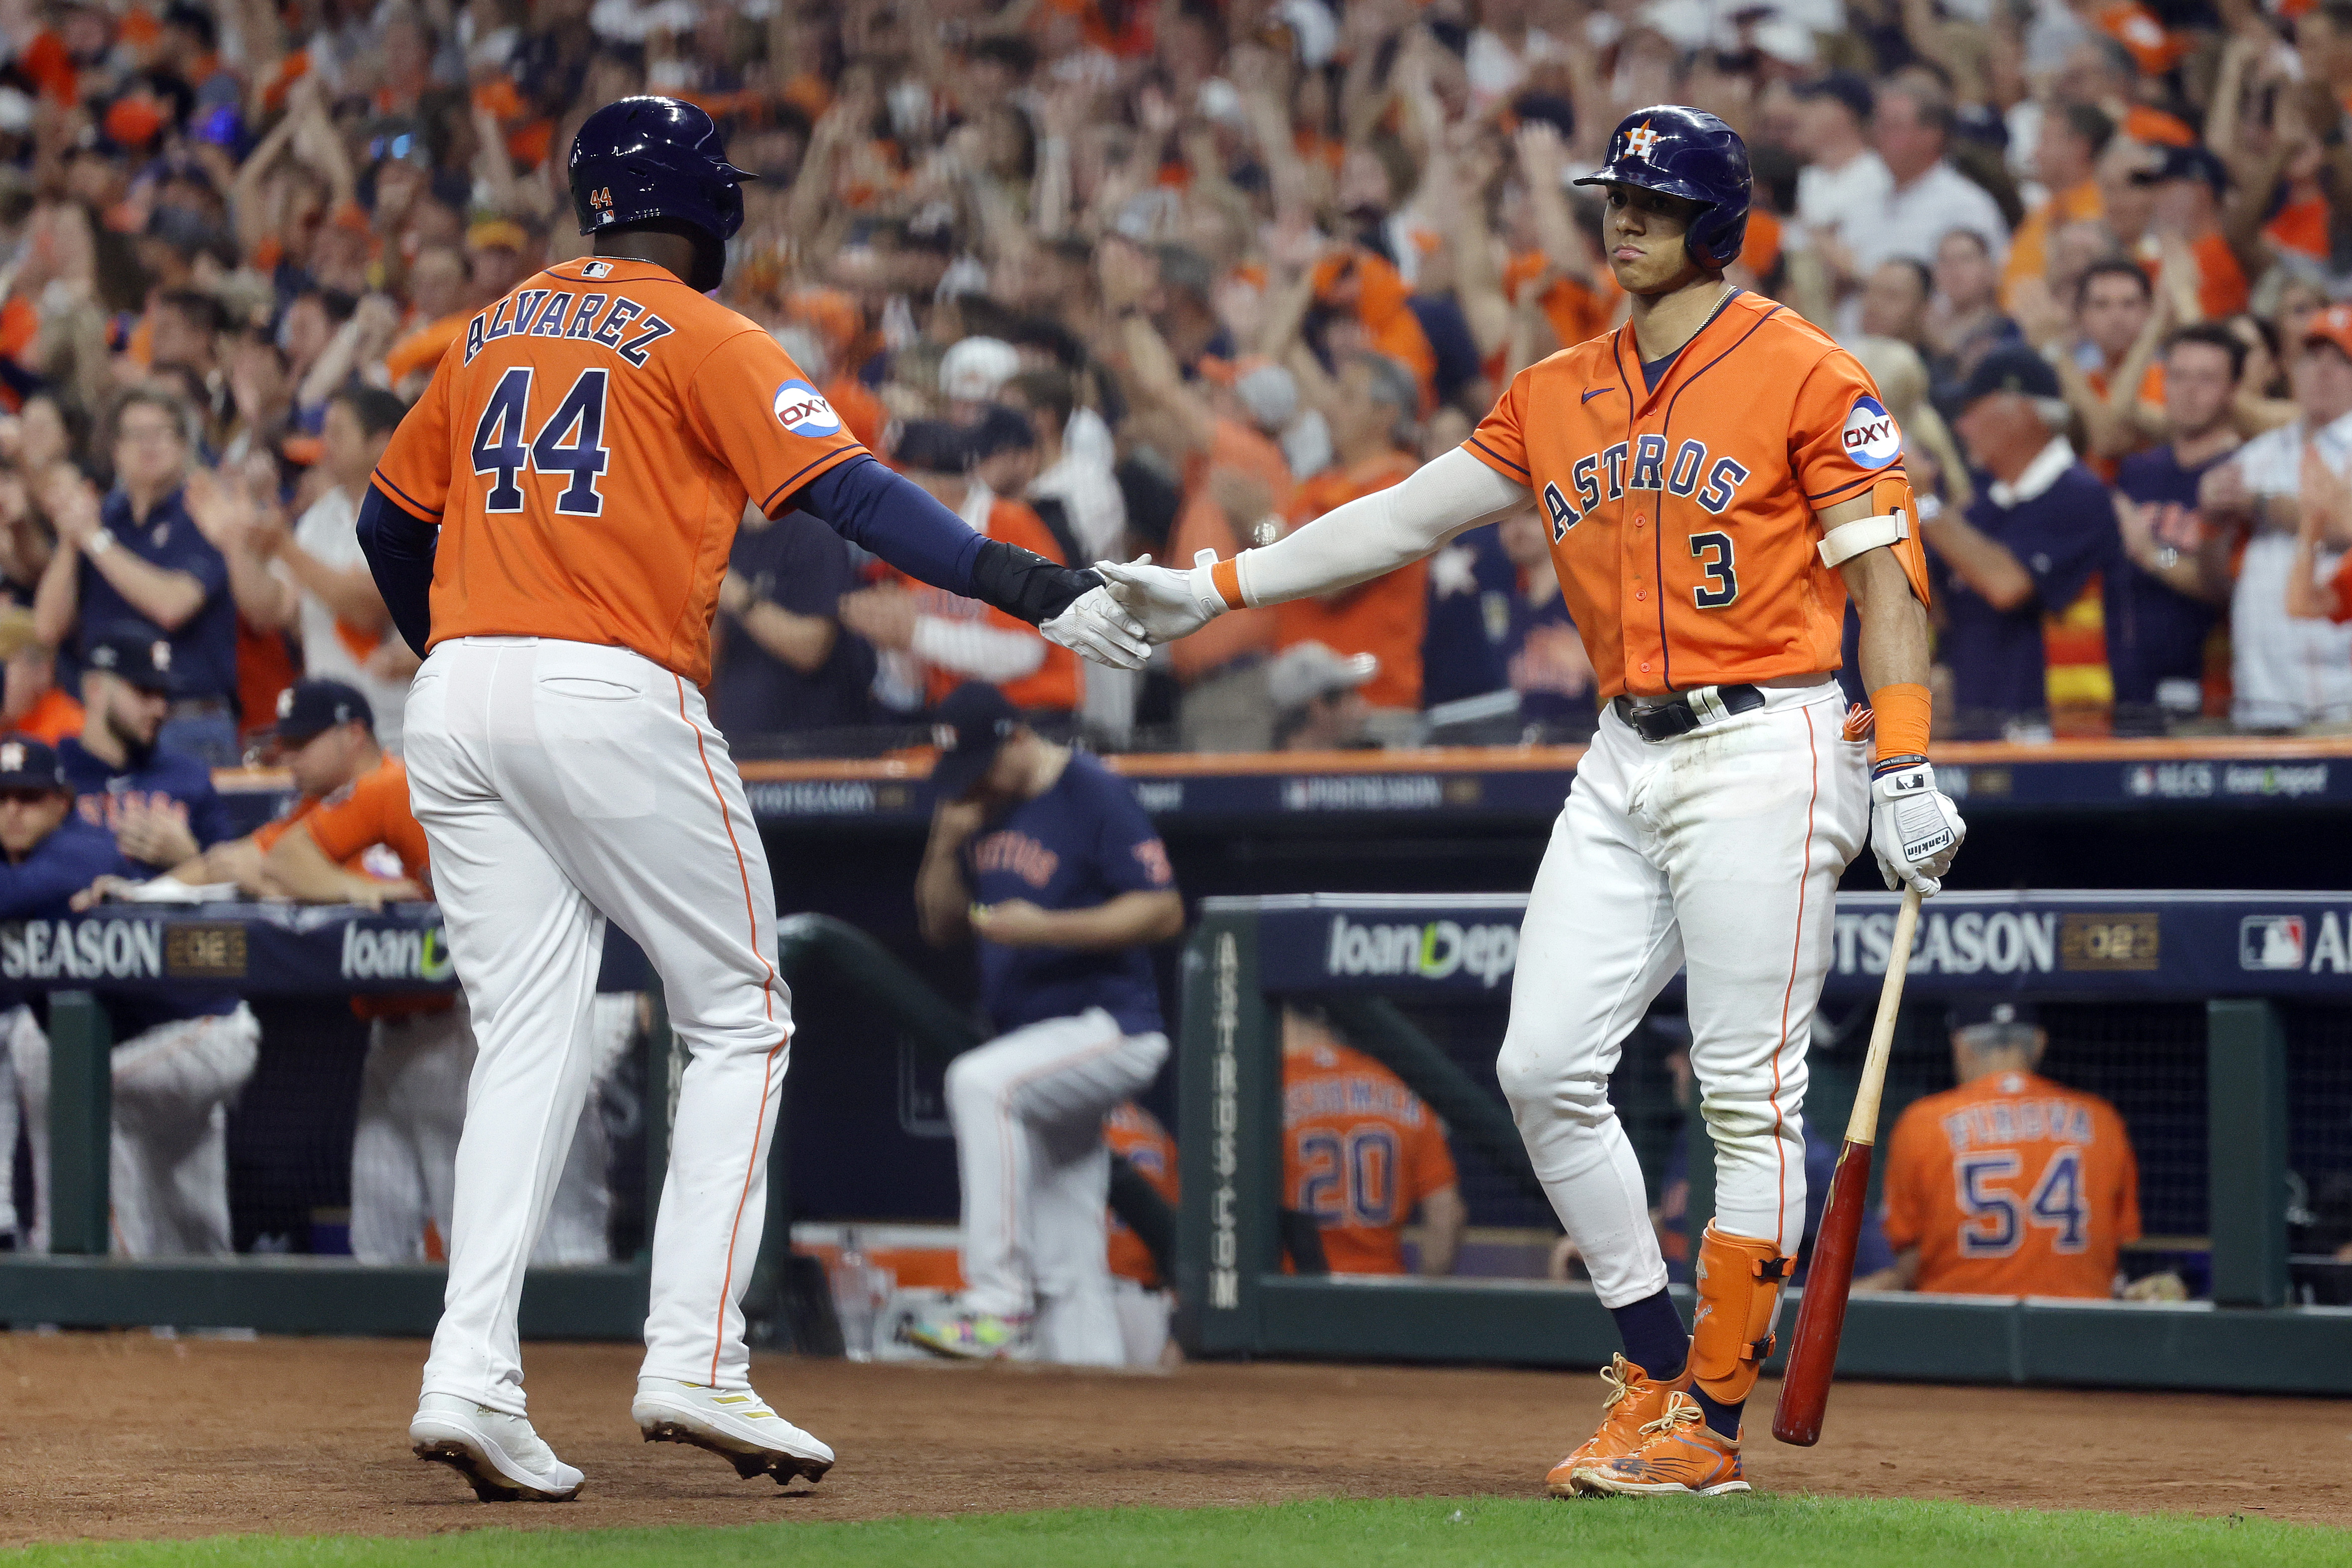 Watch Lance McCullers close out the Astros Game 7 victory by